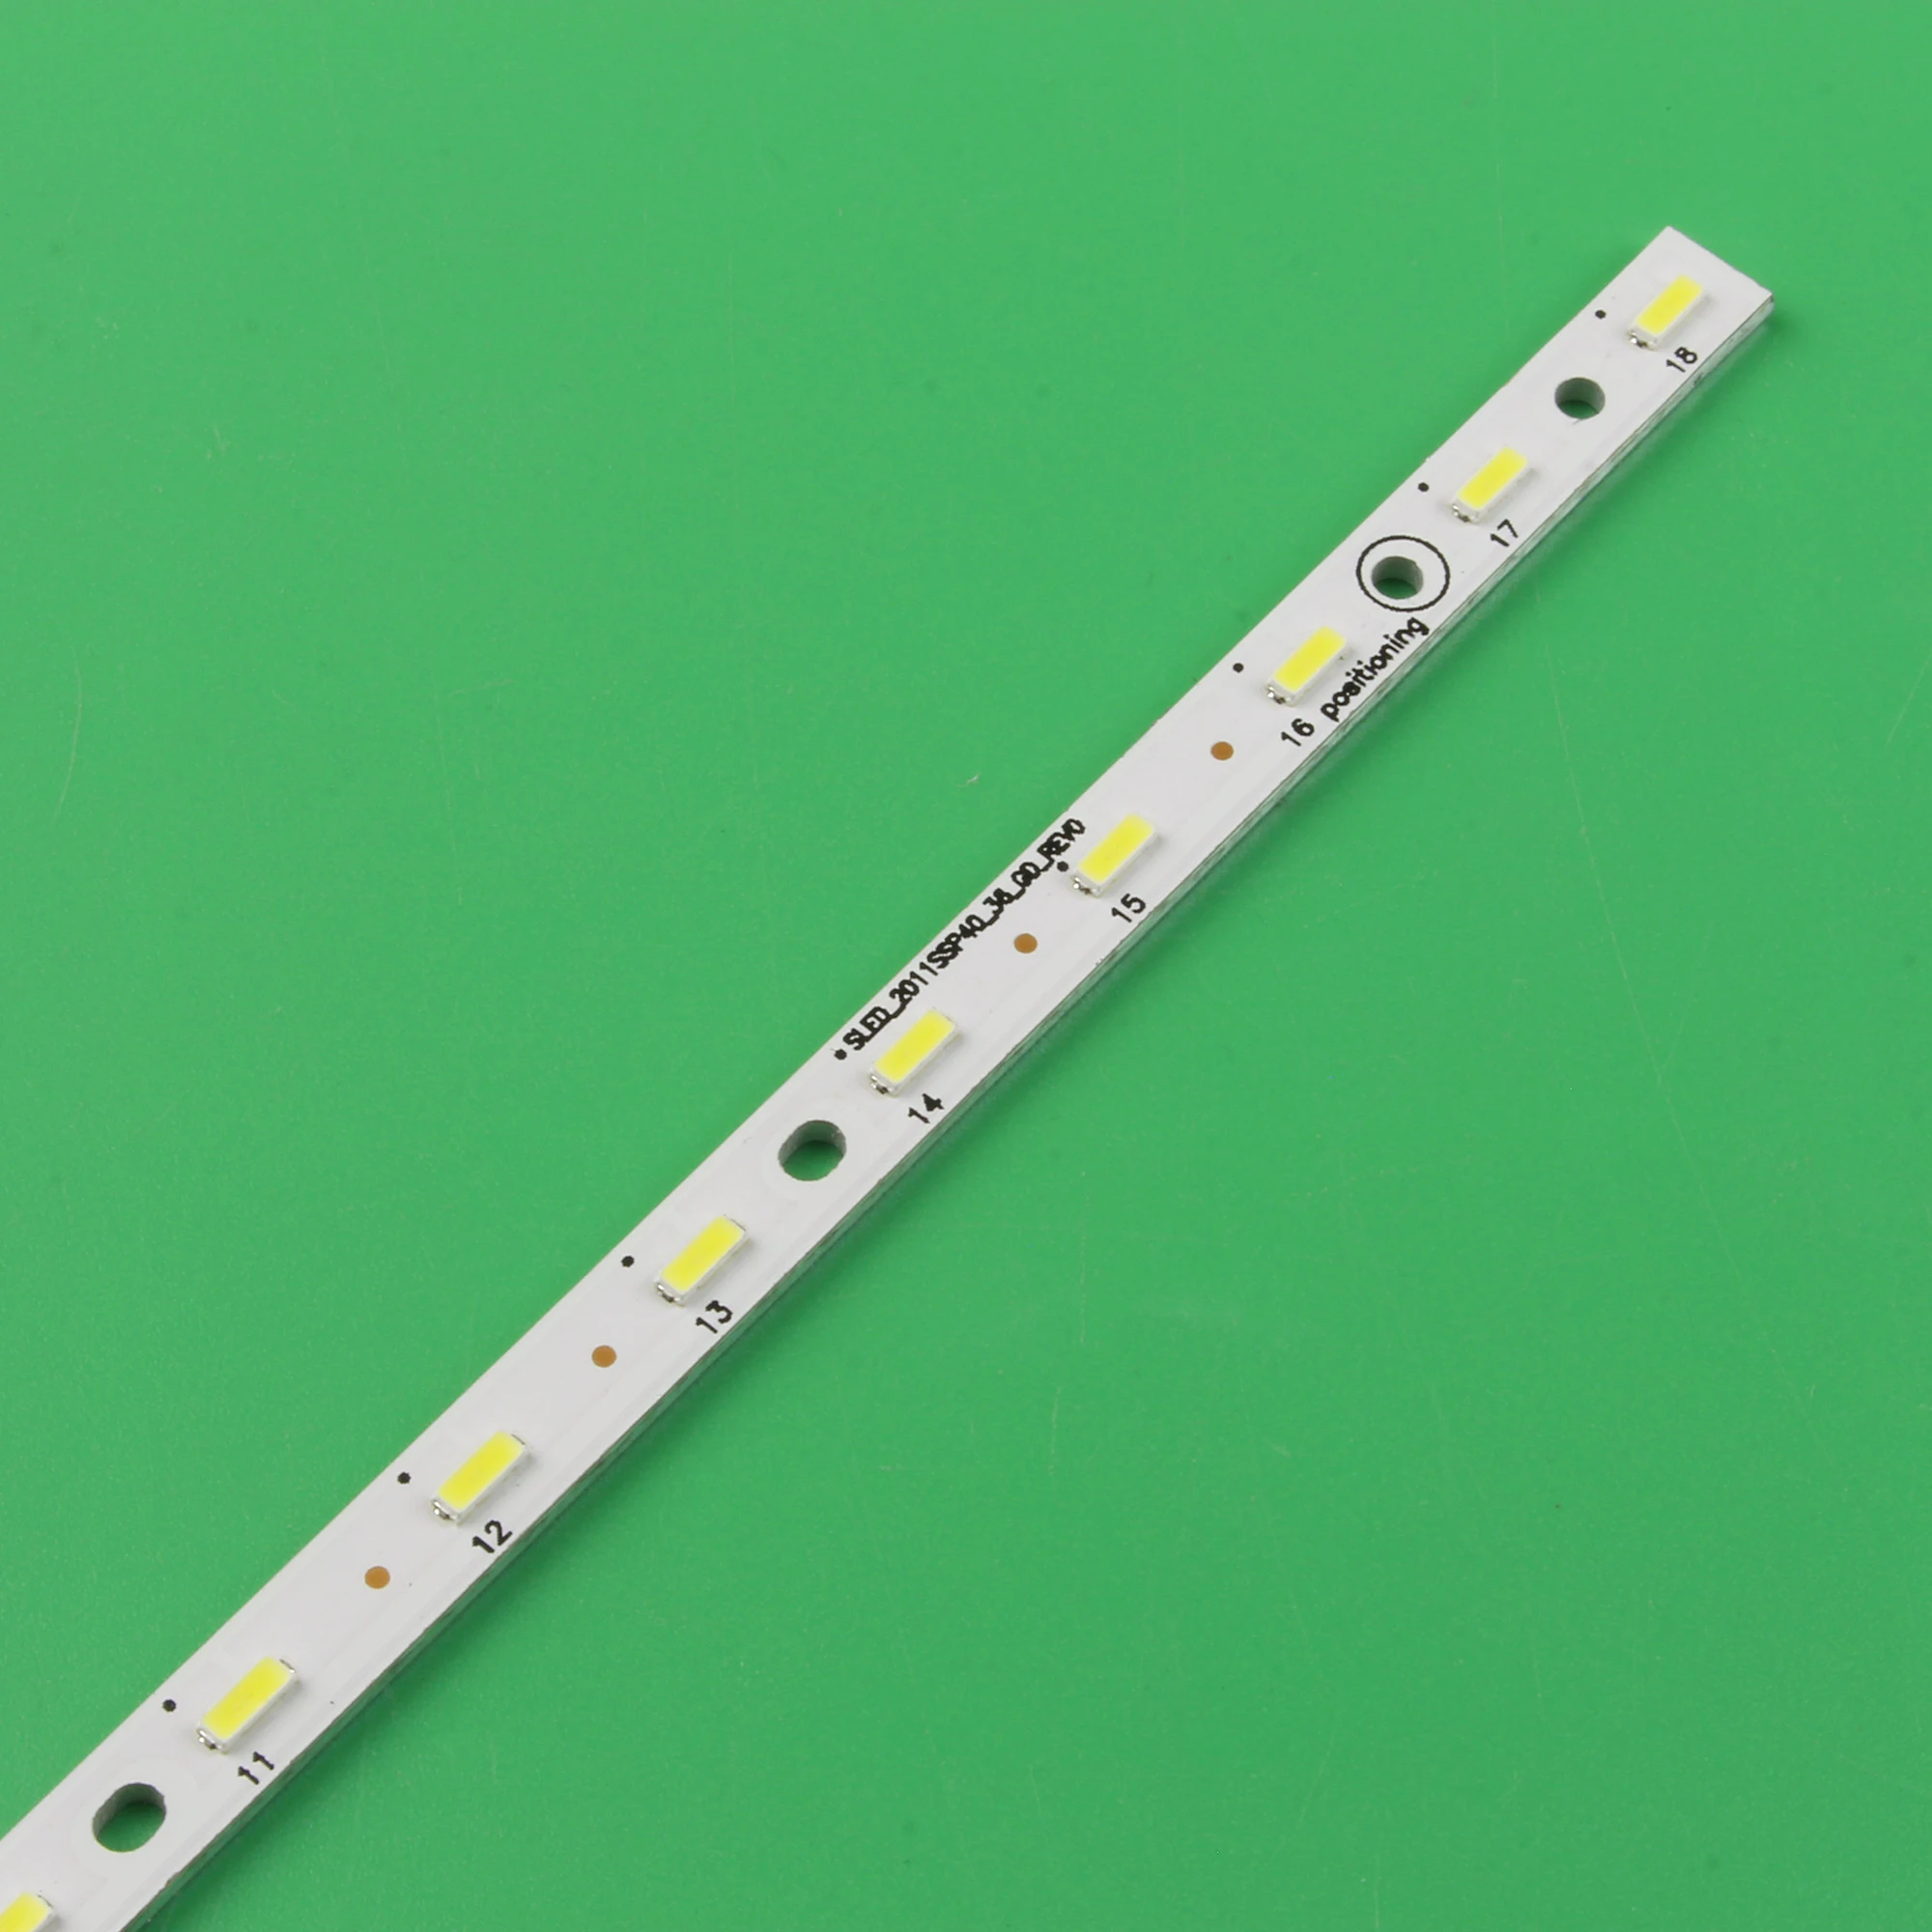 LED strip 36 leds for LCD-40NX530A LCD-40NX330A LCD-40LX430A LCD-40NX430A LCD-40LX830A GT0330-4 SLED 2011SSP40 36 DG-REV0 images - 6